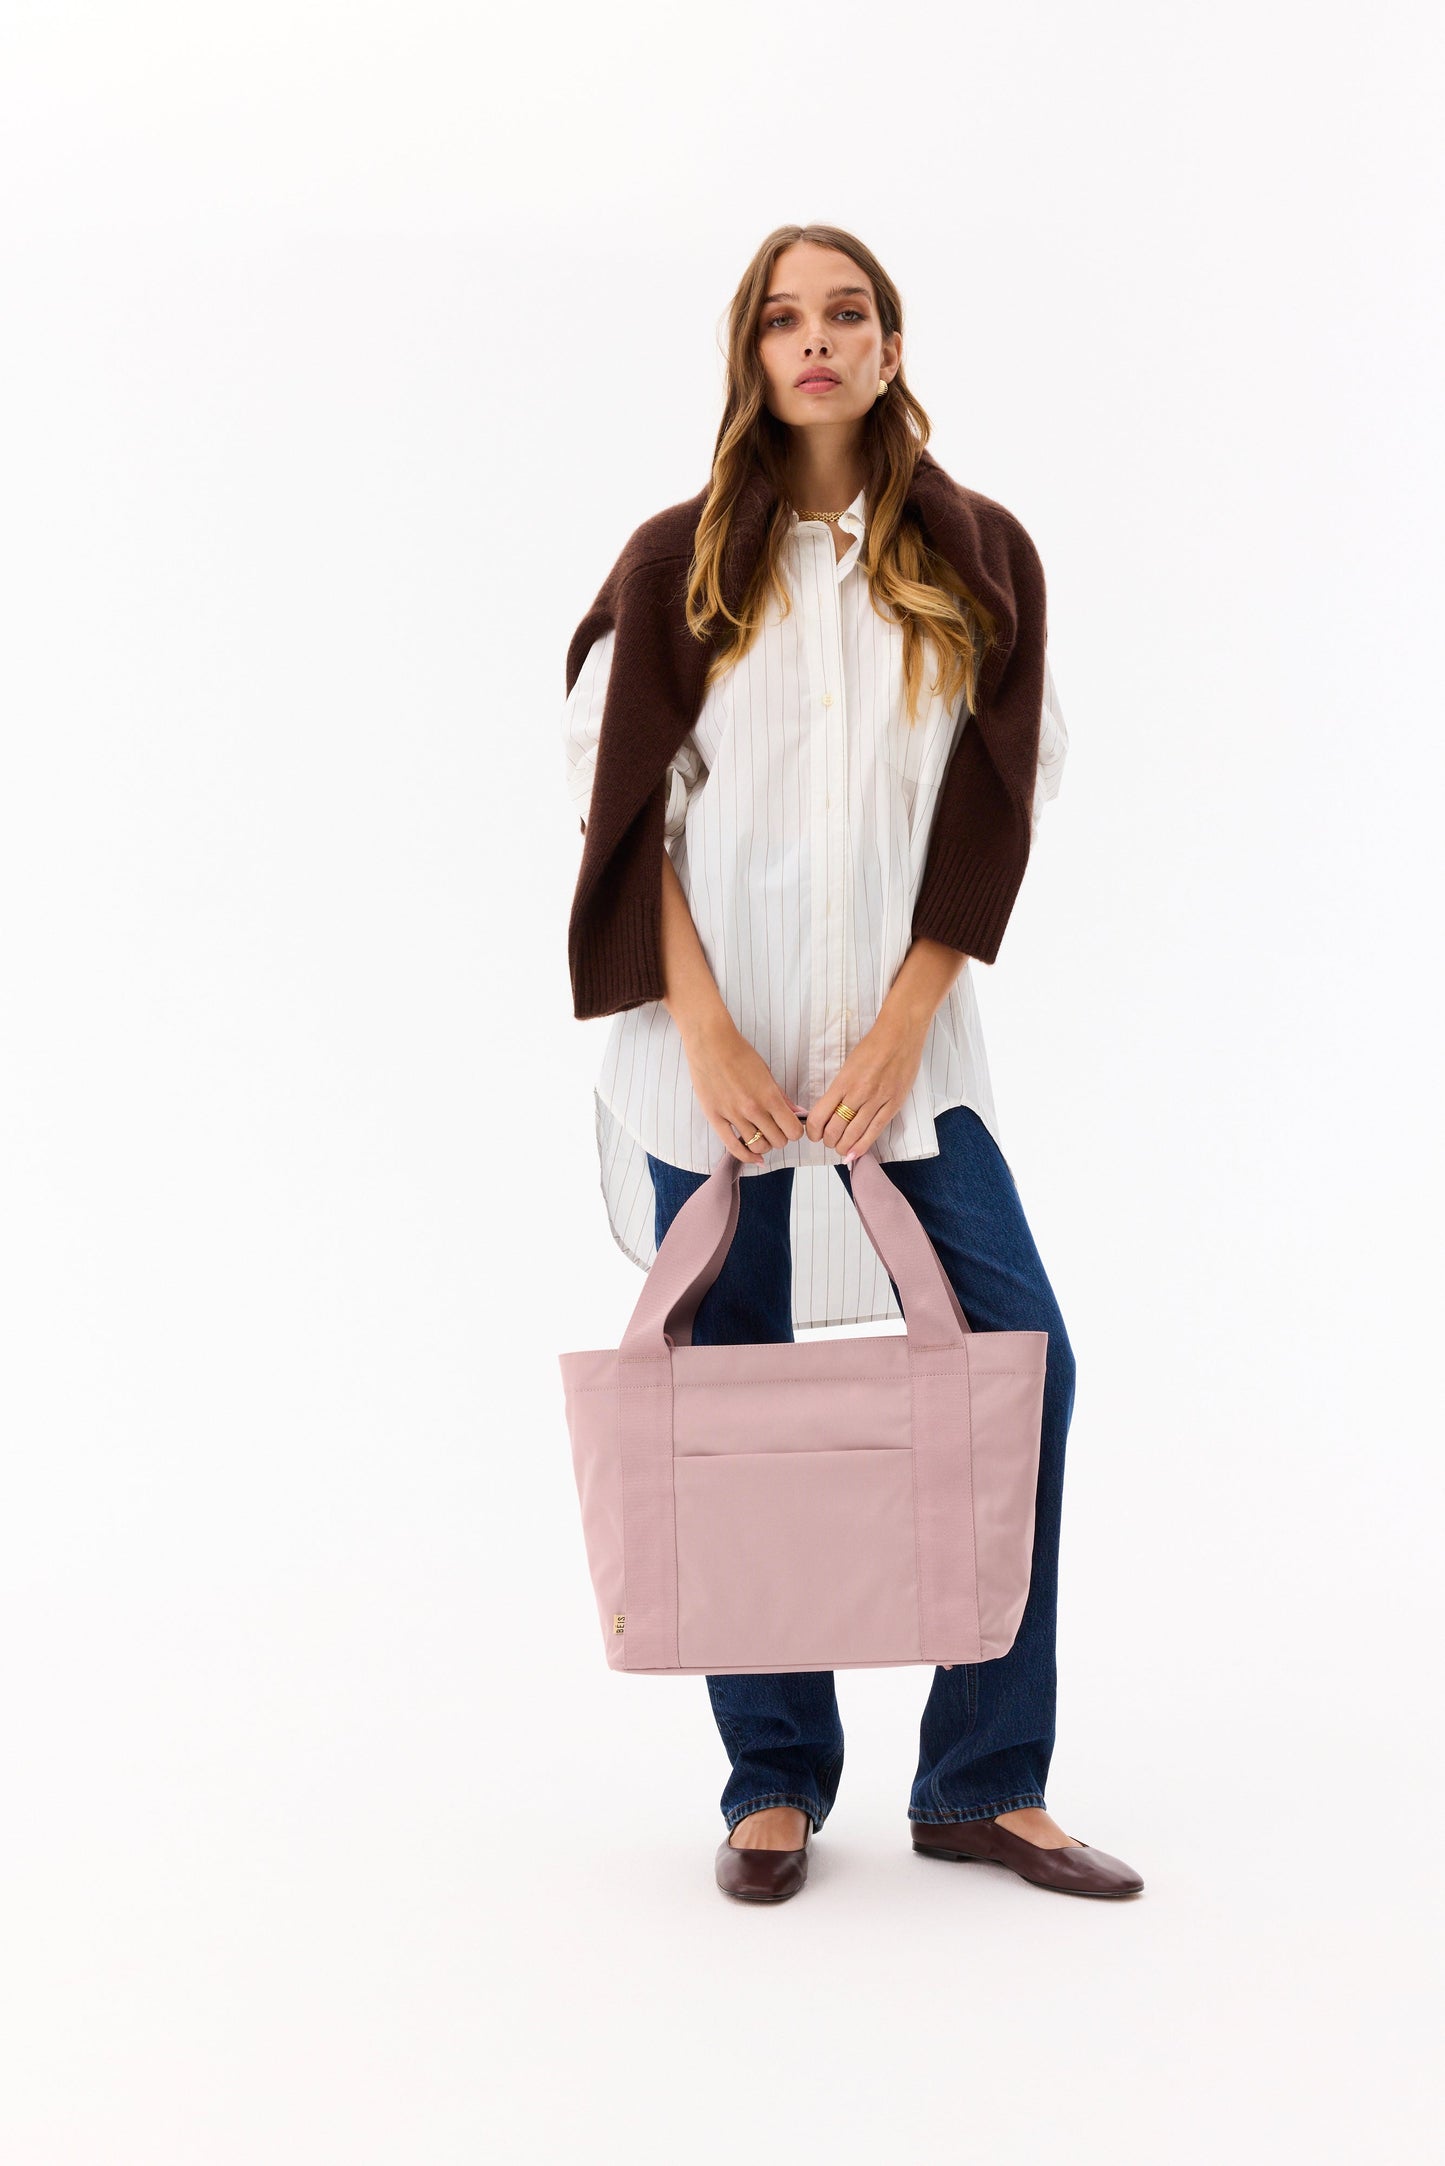 The BÉISics Tote in Atlas Pink